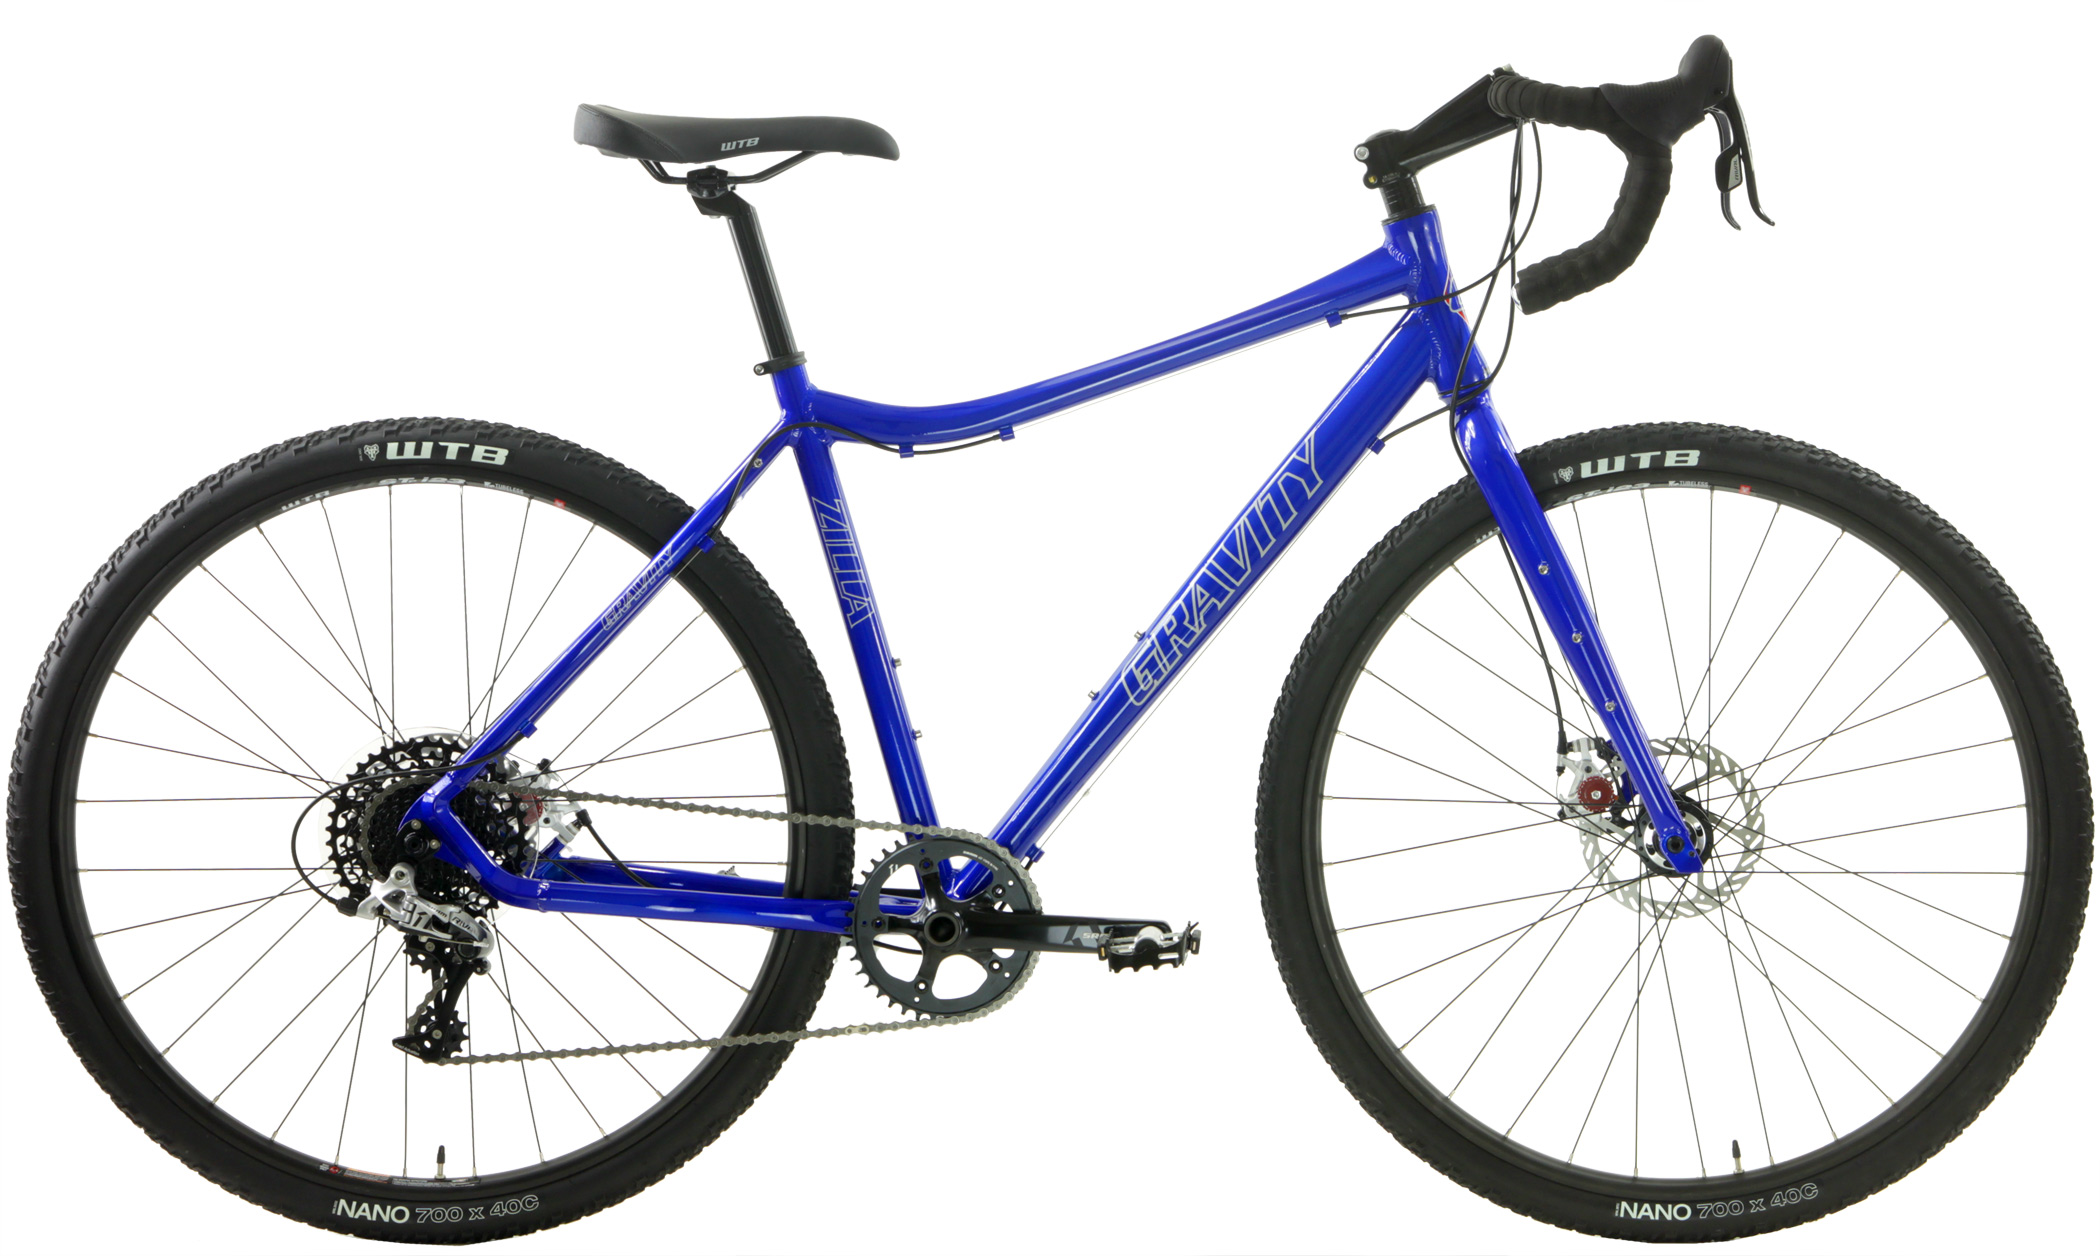 Save up to 60% off new Monster Cross Cyclocross Road Bikes